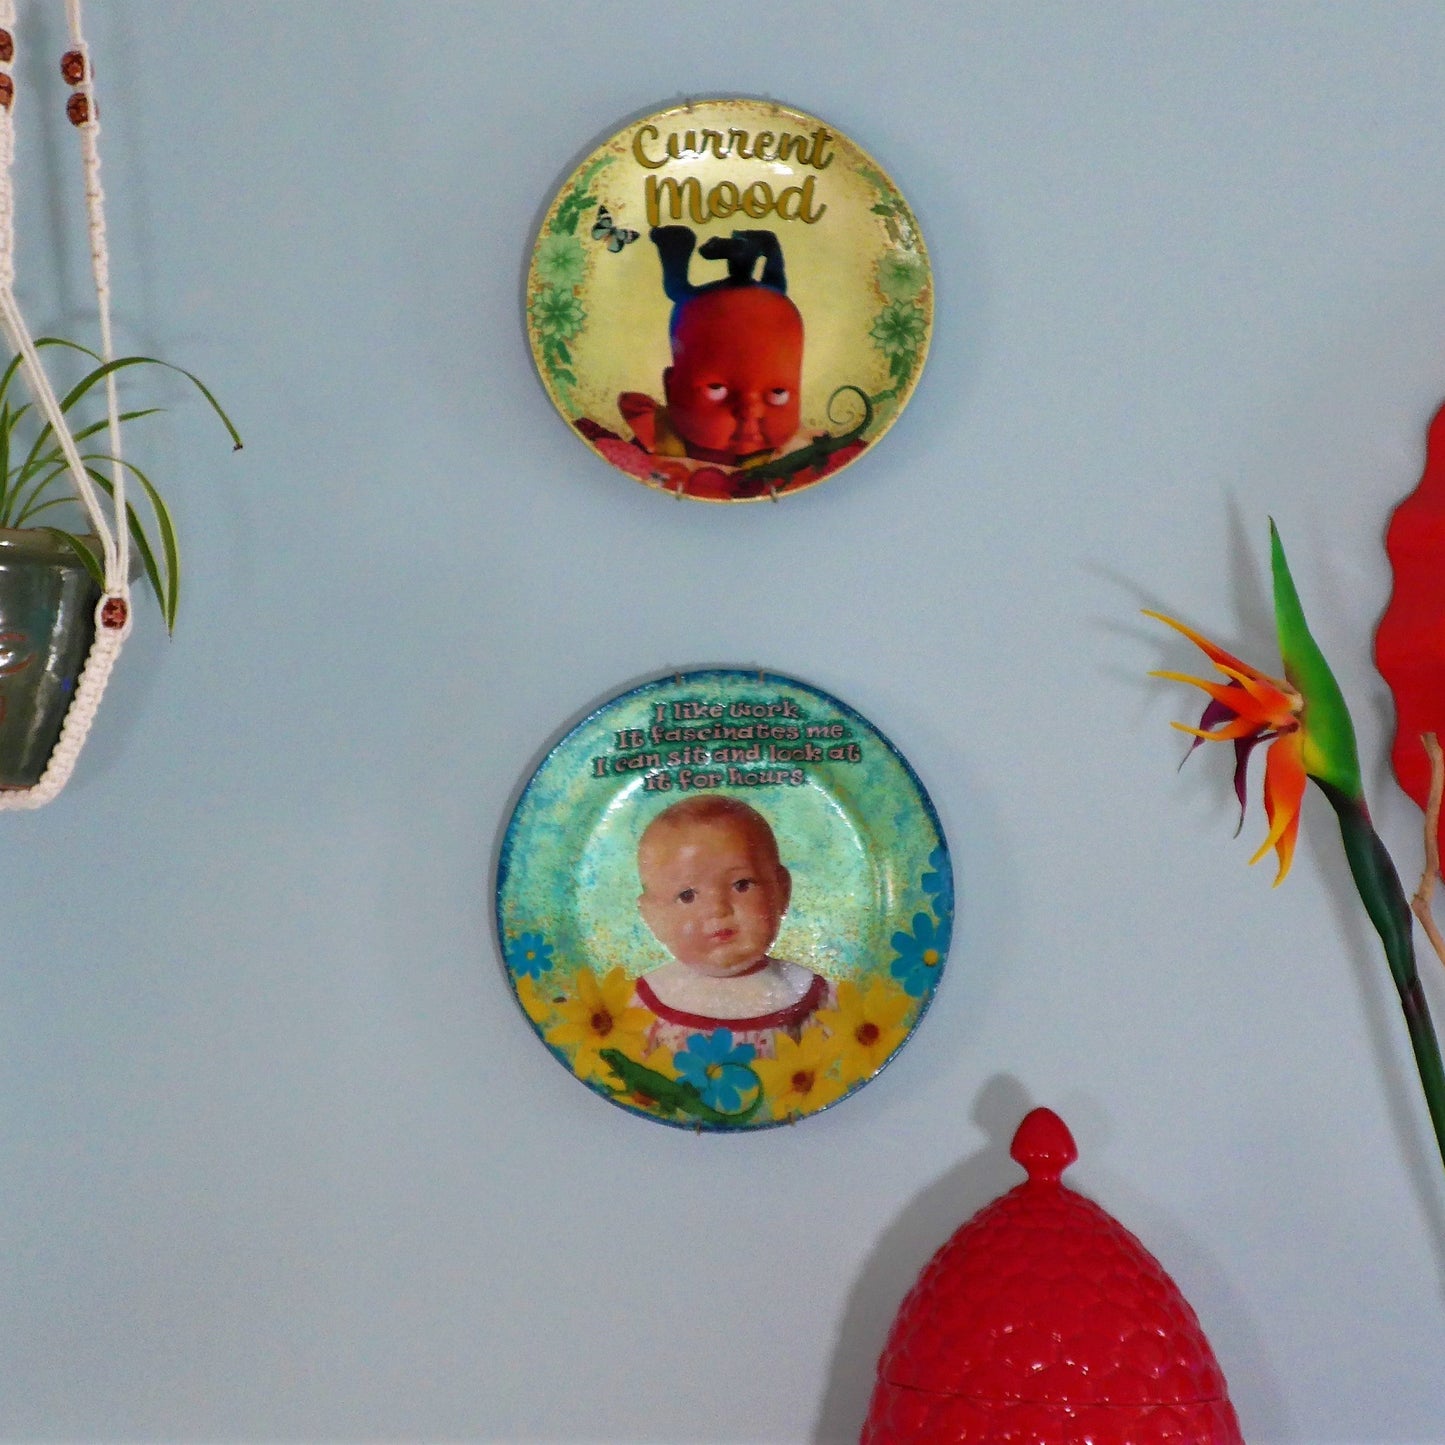 House of Frisson "I Like Work It Fascinates Me I Can Sit And Look At It For Hours" Green Wall Plate front. Collage artwork featuring a vintage male doll looking miserable among flowers, a lizard, and a fly, on a green background. Plate hanging on wall with other plates.